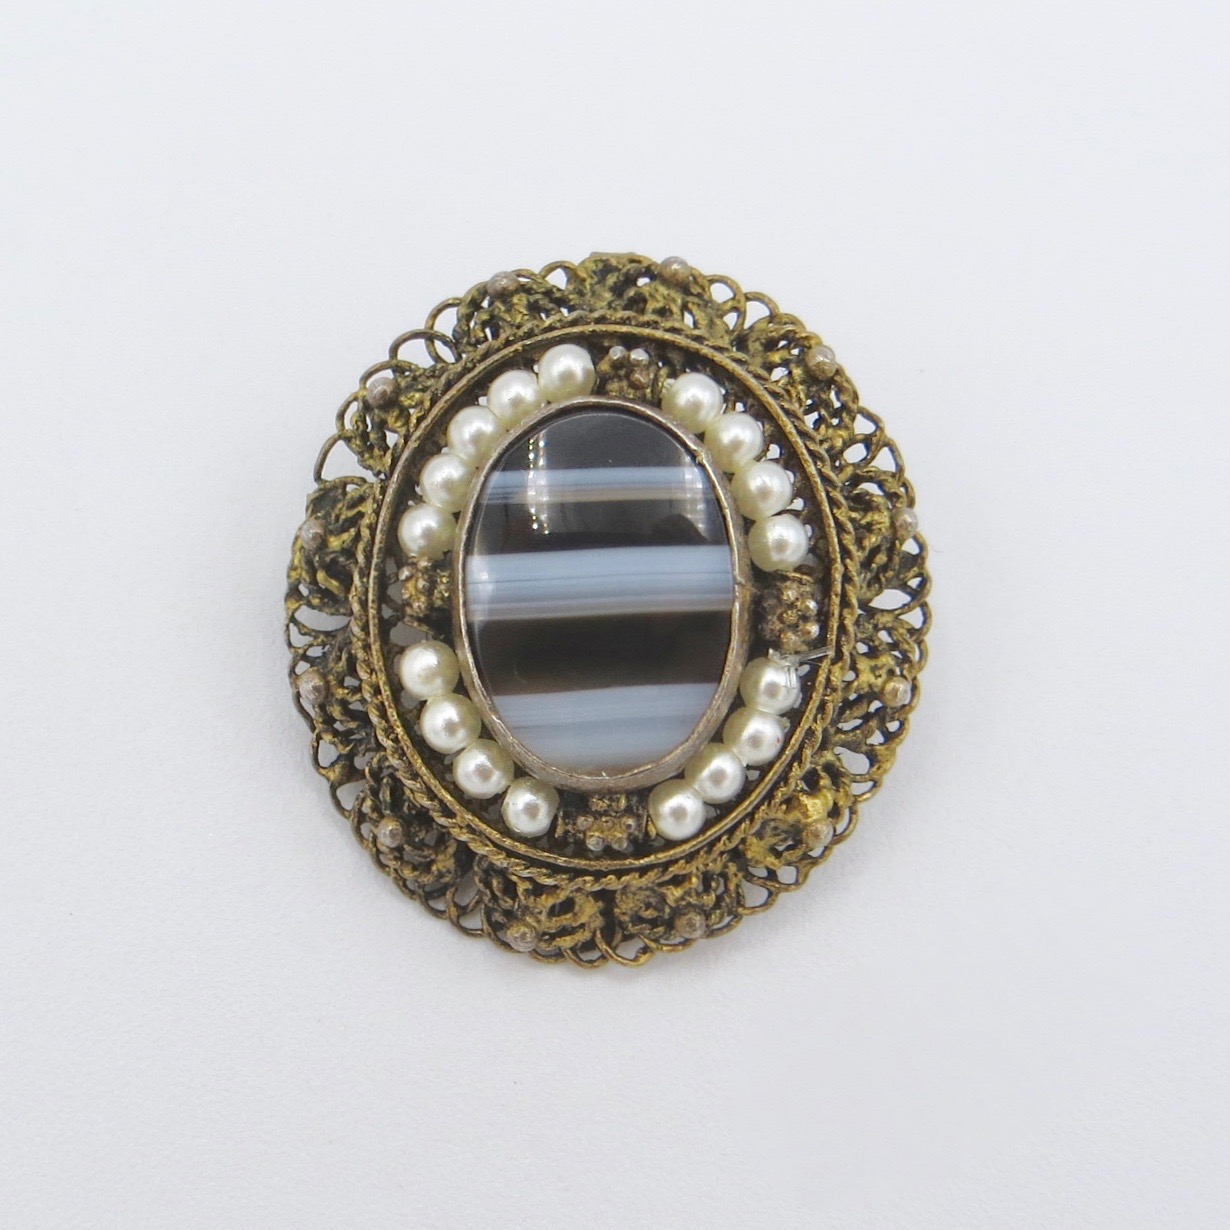 Agate Brooch with Pearls